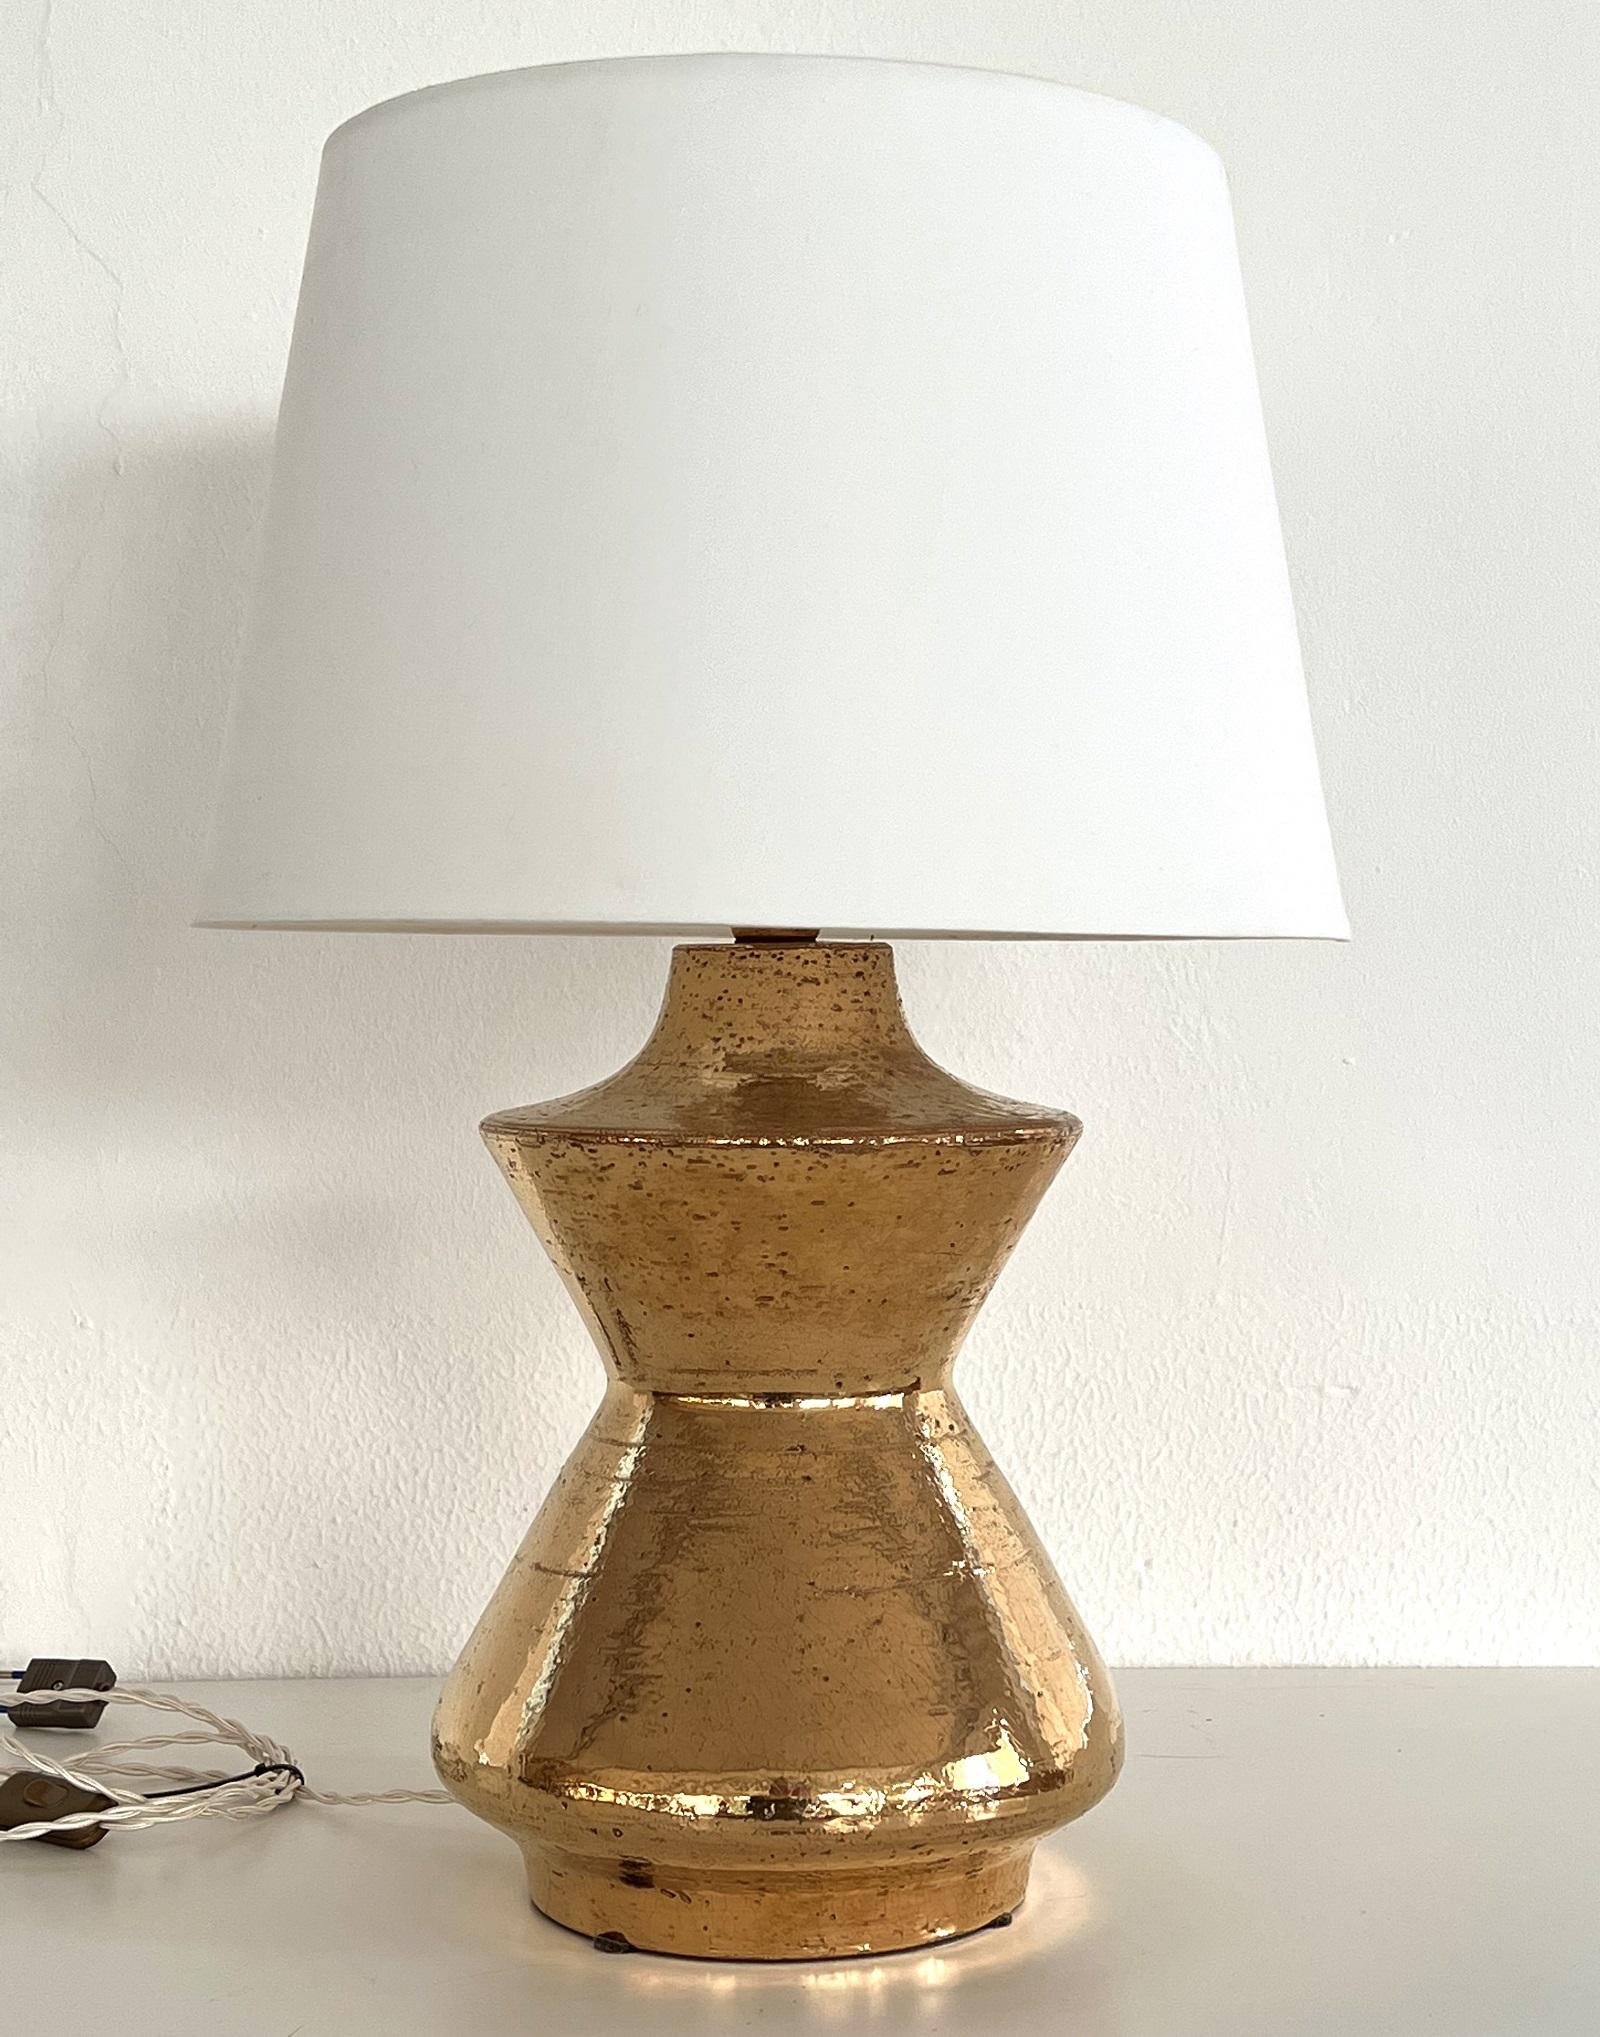 Hand-Crafted Italian Mid-Century Ceramic Table Lamp in Gold Metallic by Aldo Londi, 1960 For Sale